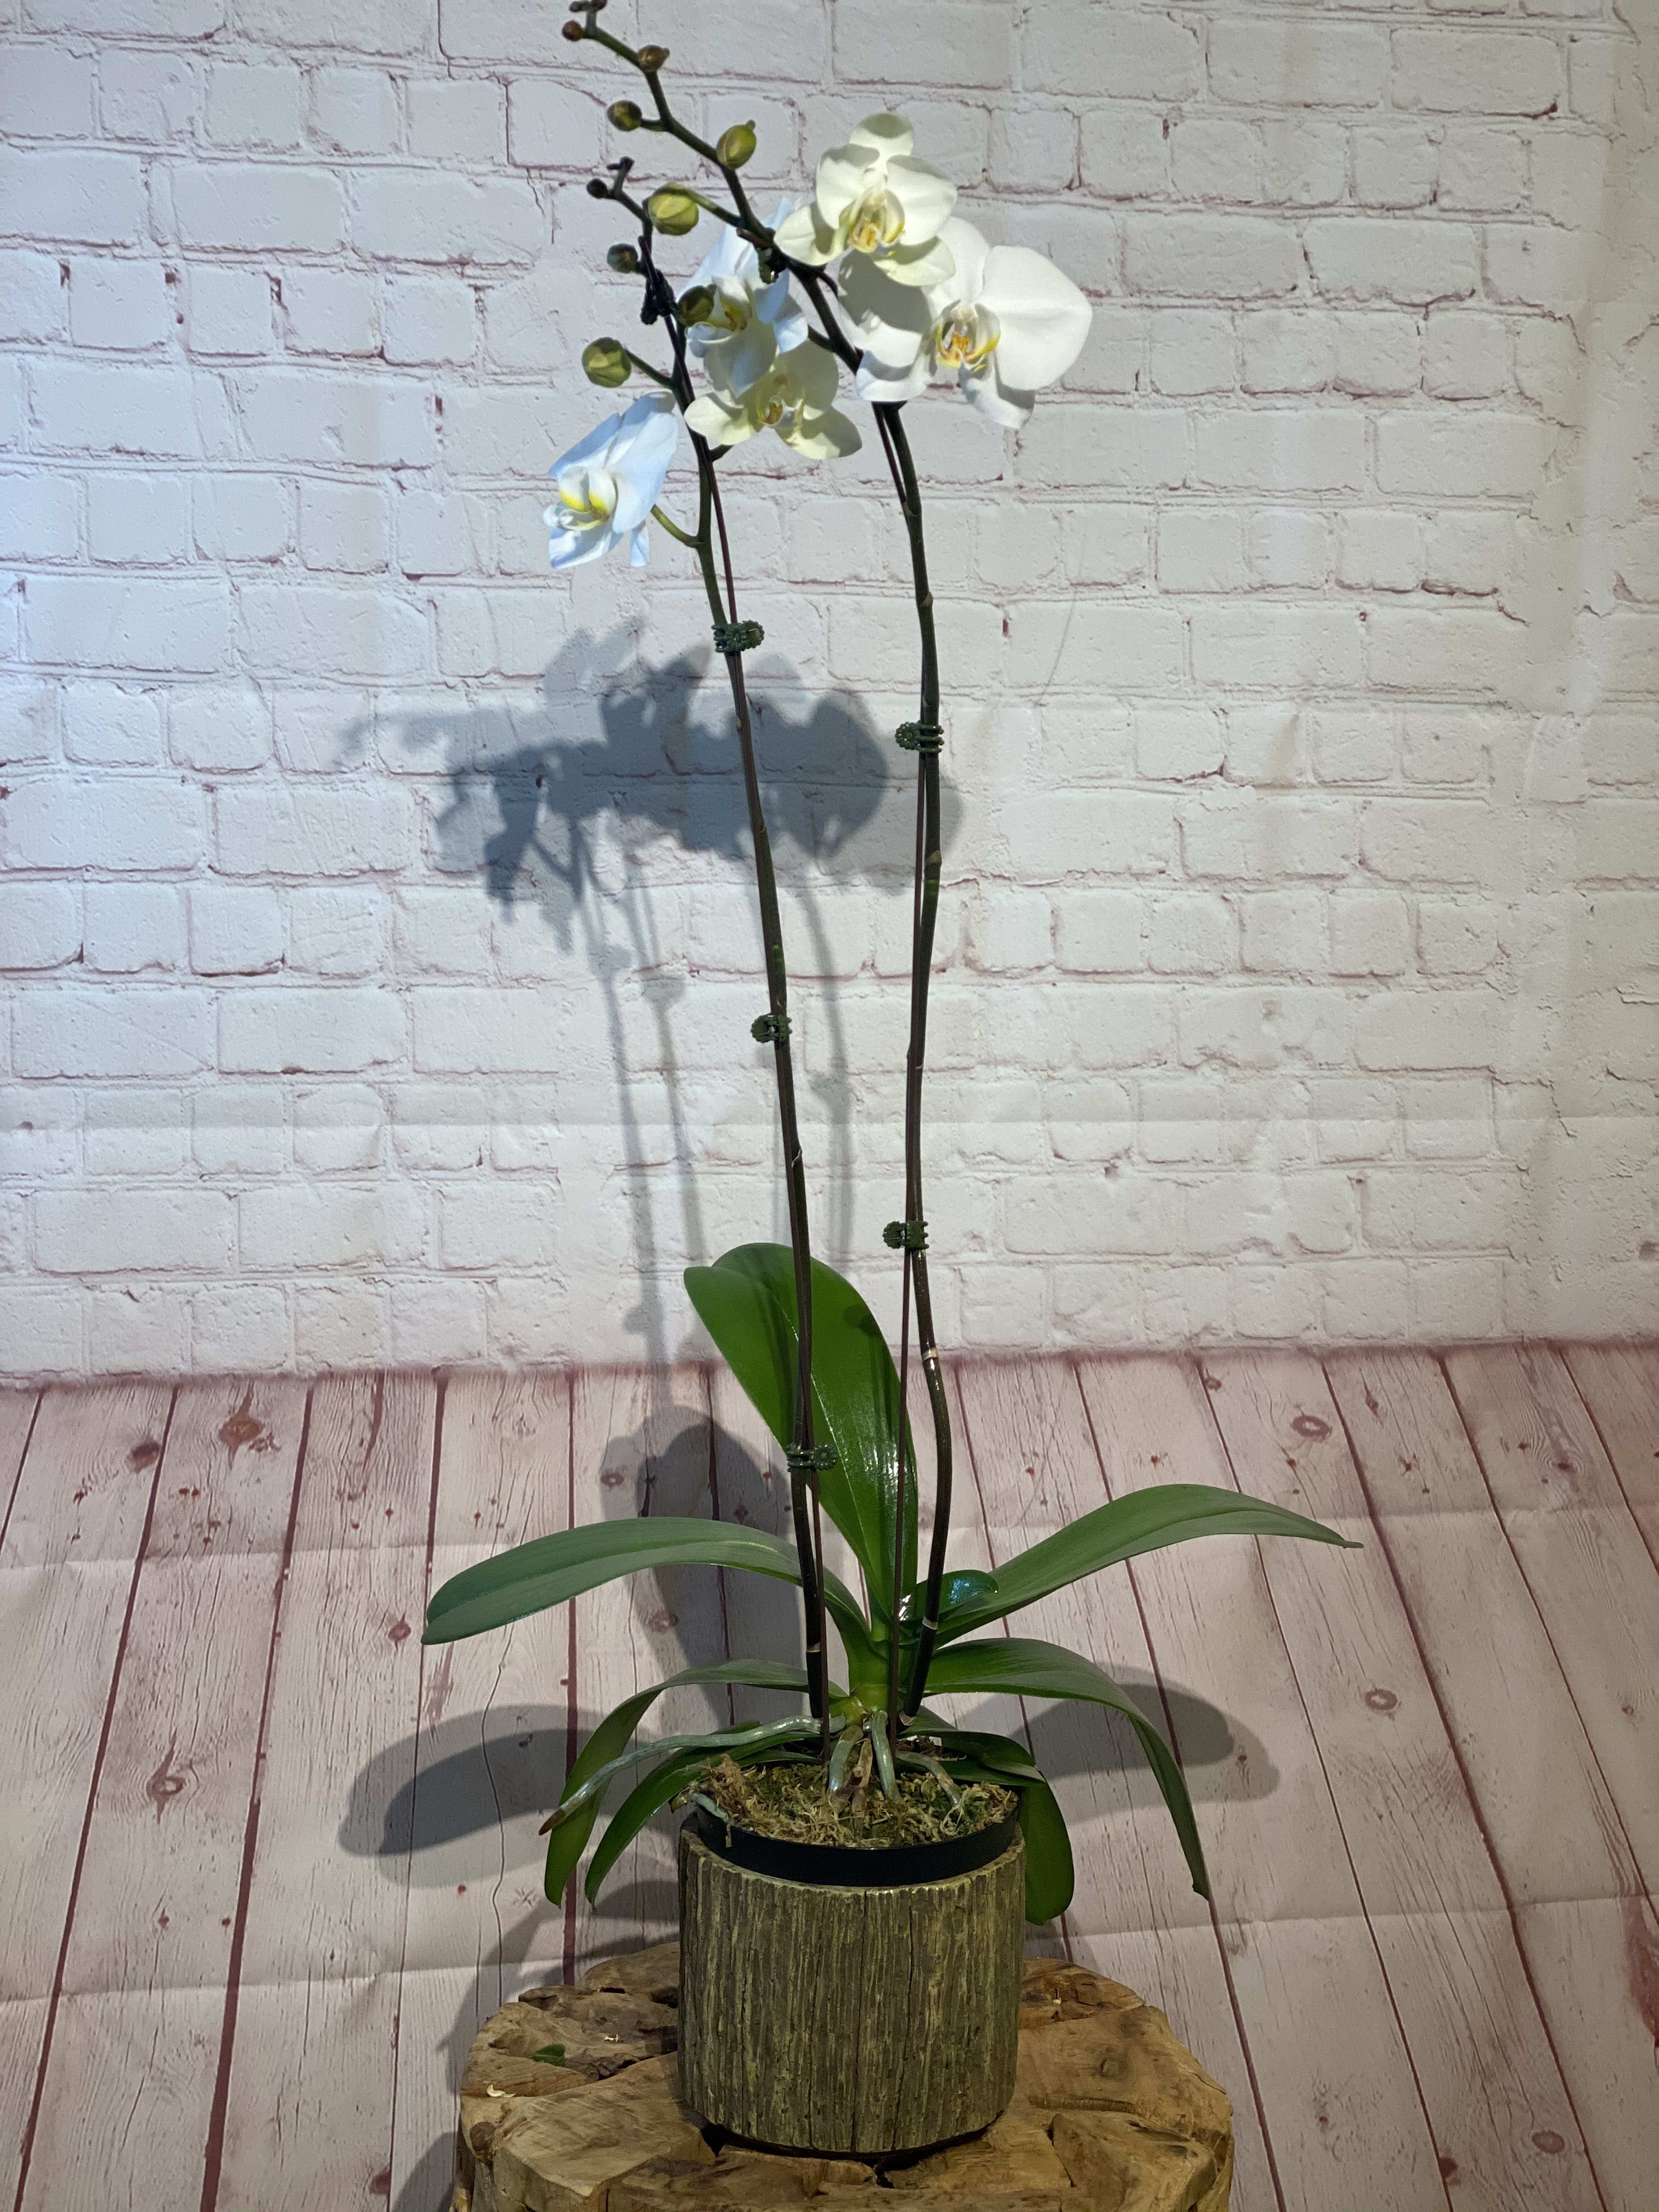 Magnificent Orchid Planter - For an extra special surprise, send double the elegance with two phalaenopsis orchid plants in a natural terra cotta dish. This graceful pair is an exceptional gift for an exceptional person!  Two white phalaenopsis orchids in a terra cotta dish are accented with birch twigs and moss, for a naturally graceful gift.